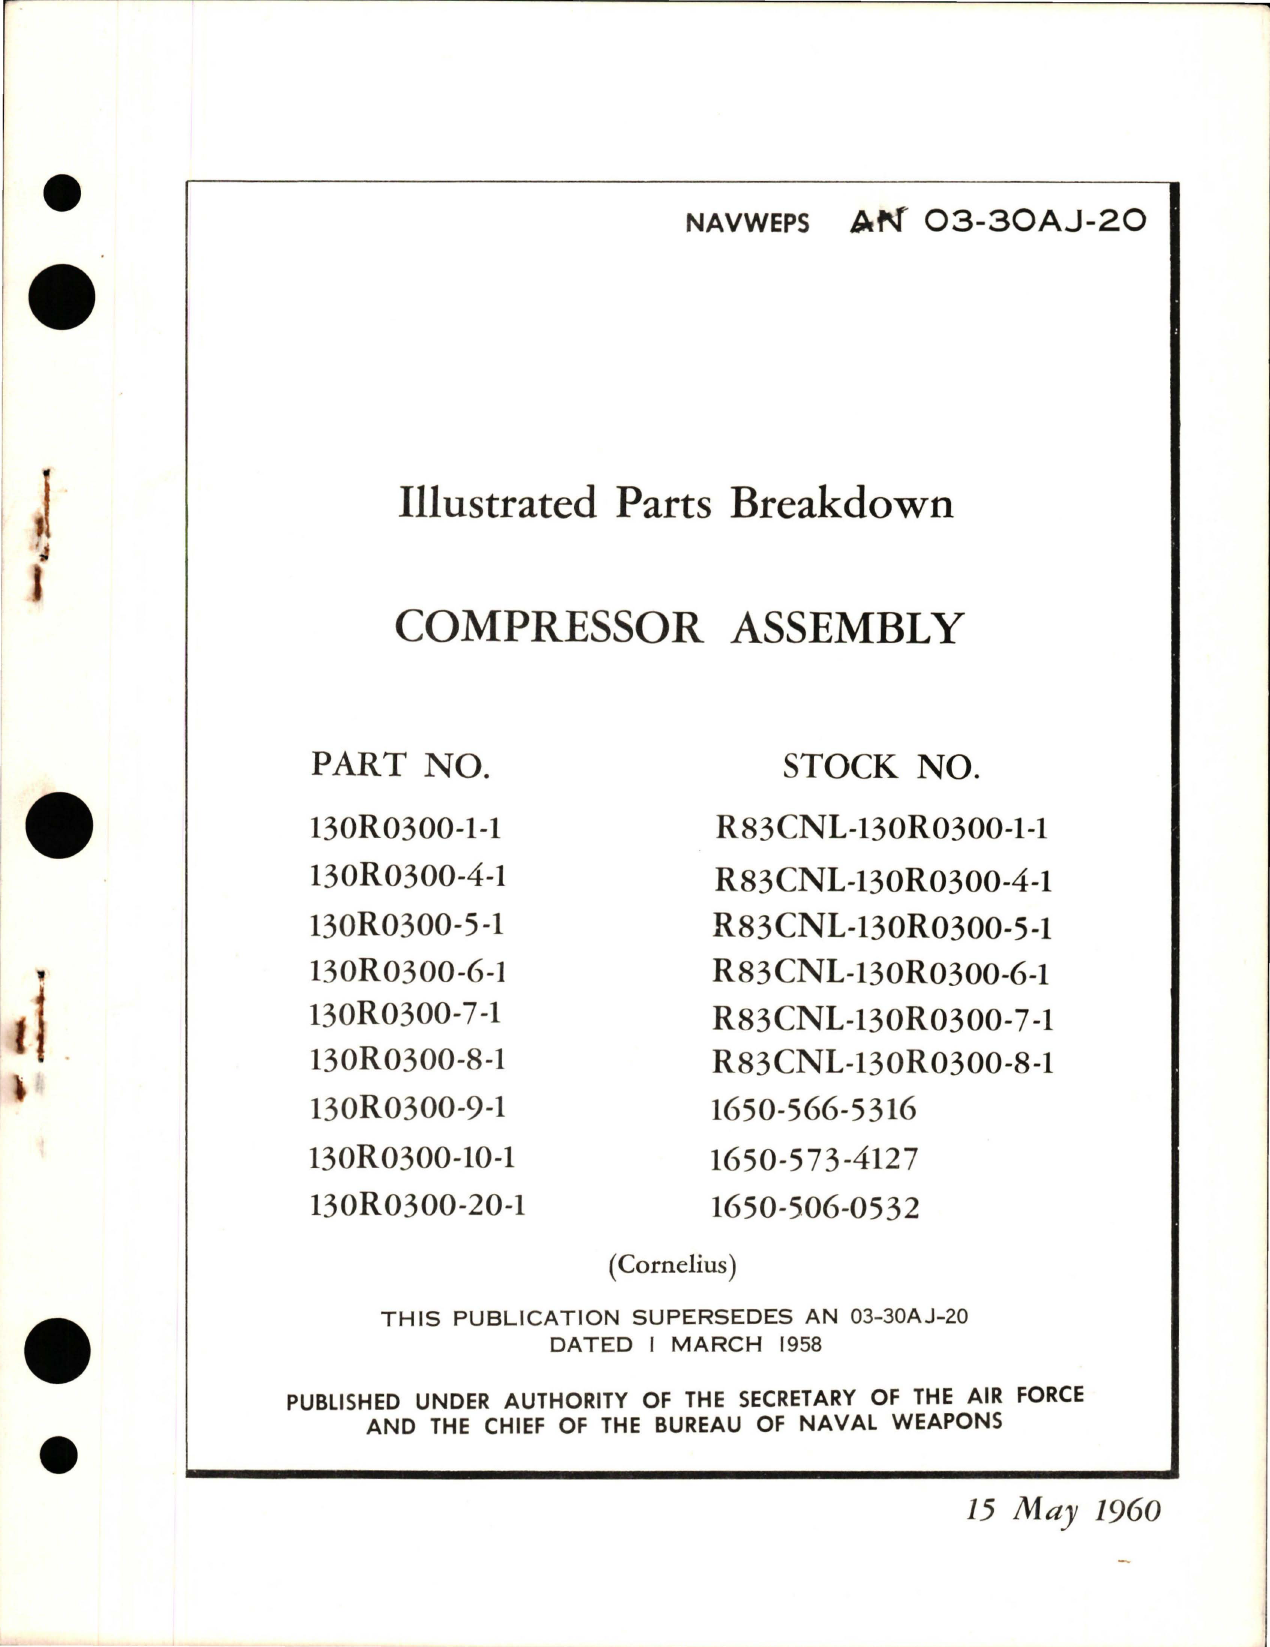 Sample page 1 from AirCorps Library document: Illustrated Parts Breakdown for Compressor Assembly